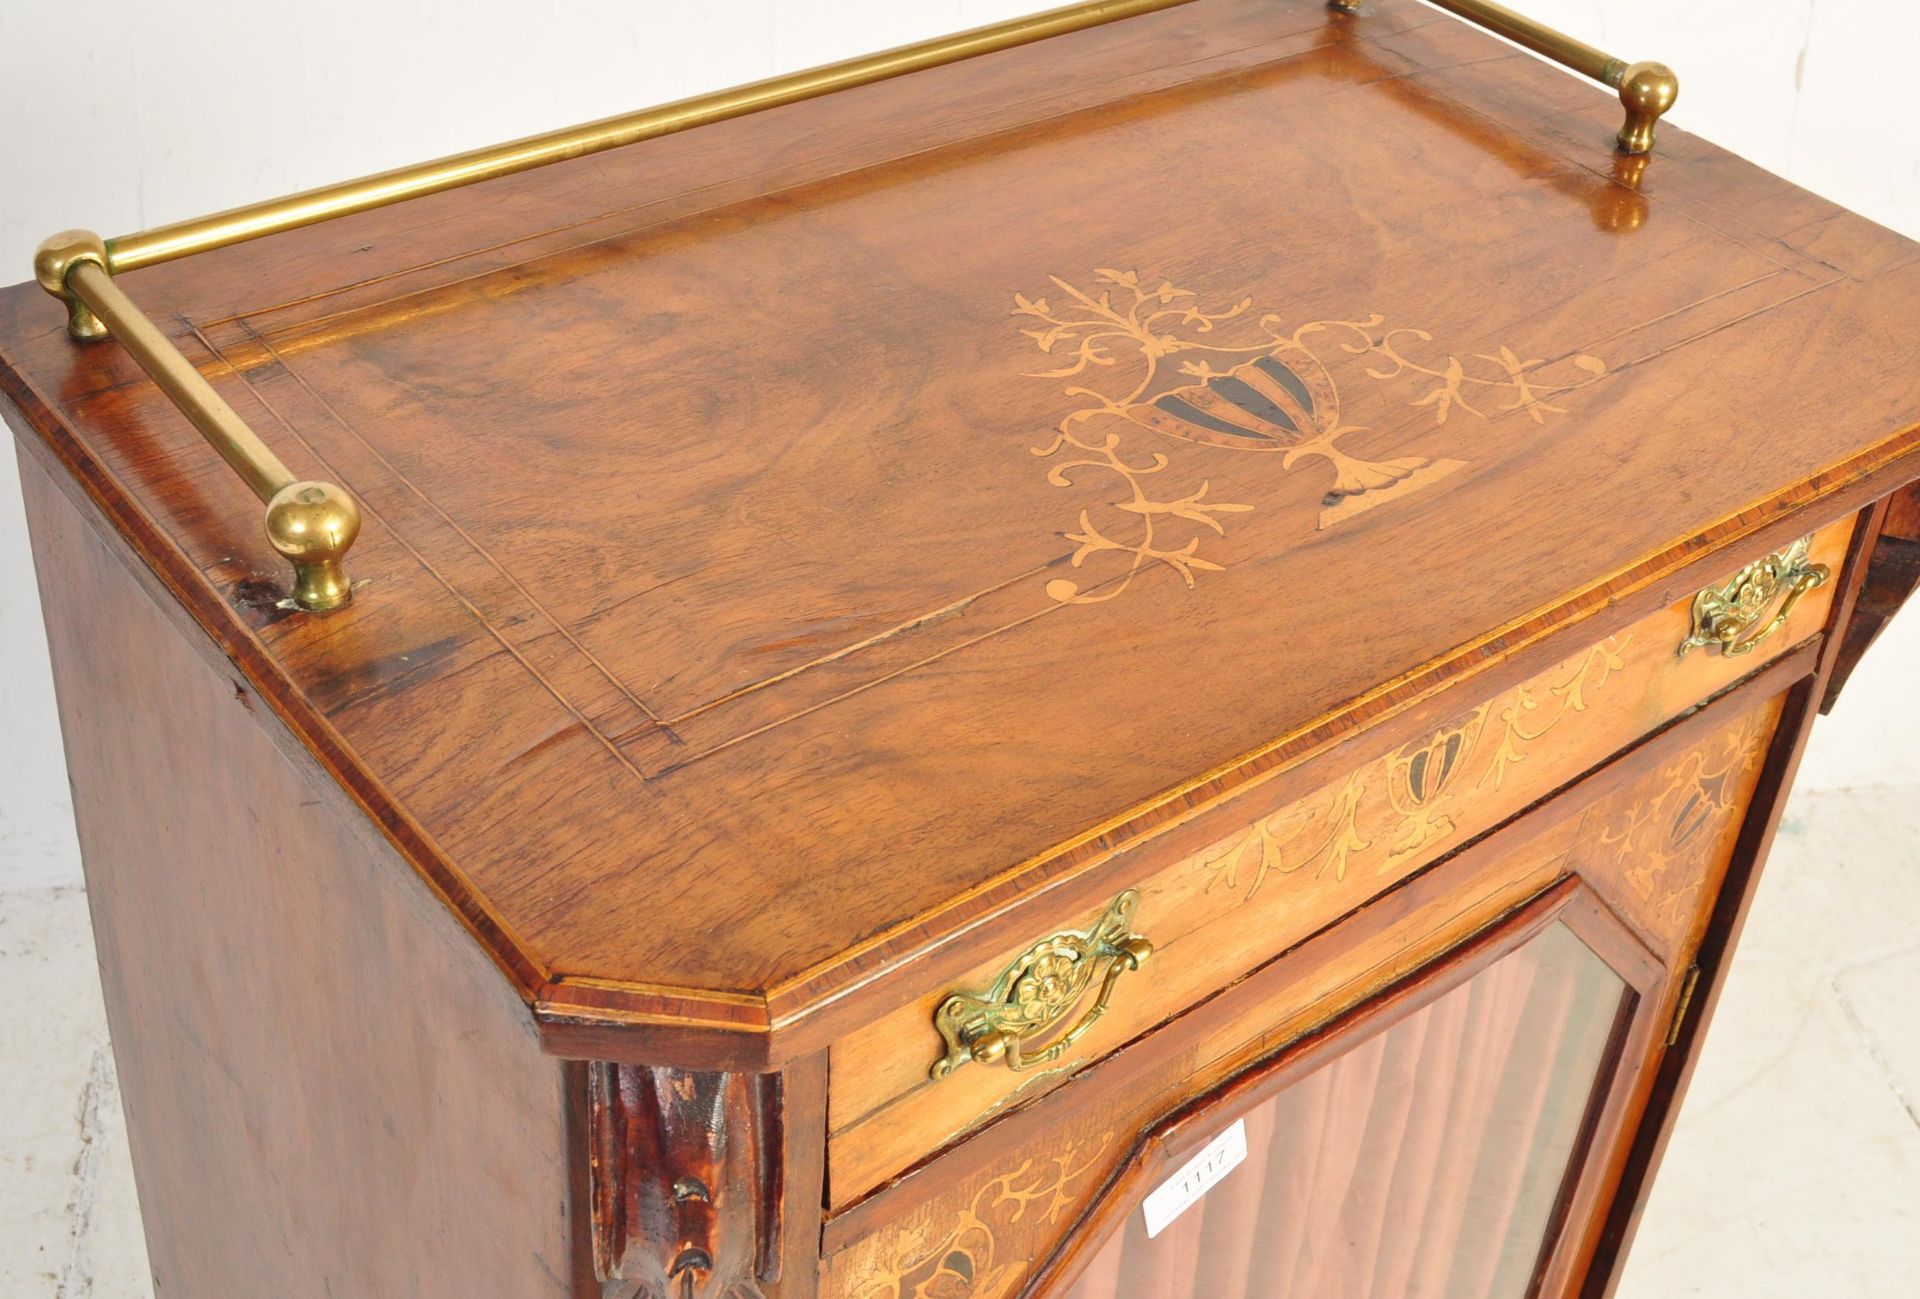 LATE 19TH CENTURY MARQUETRY INLAID PEDESTAL MUSIC CABINET - Image 7 of 10